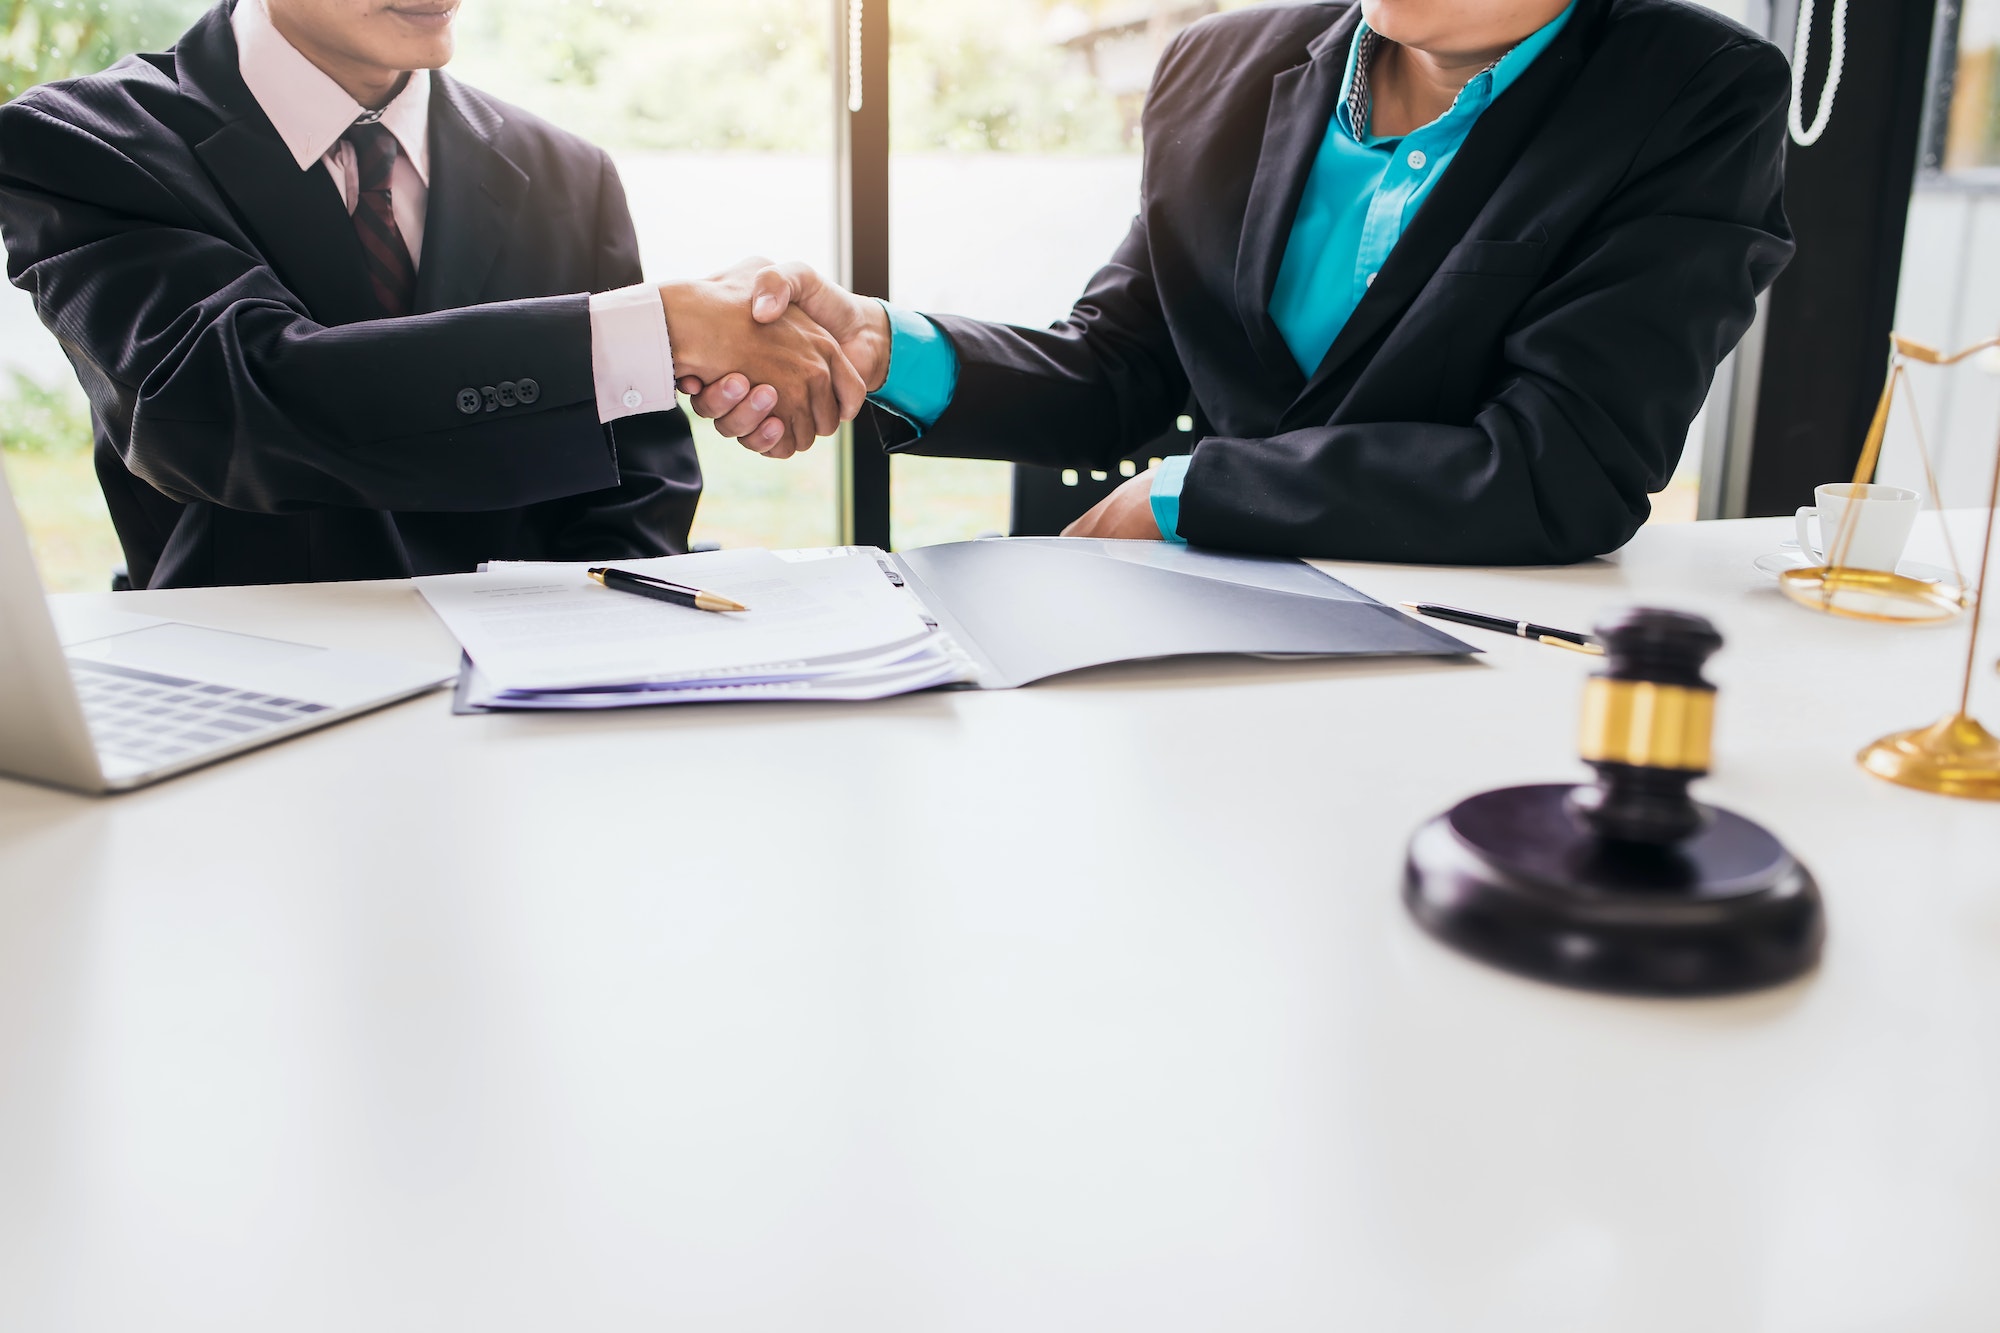 Businessman shaking hands to seal a deal with his partner lawyers or attorneys discussing